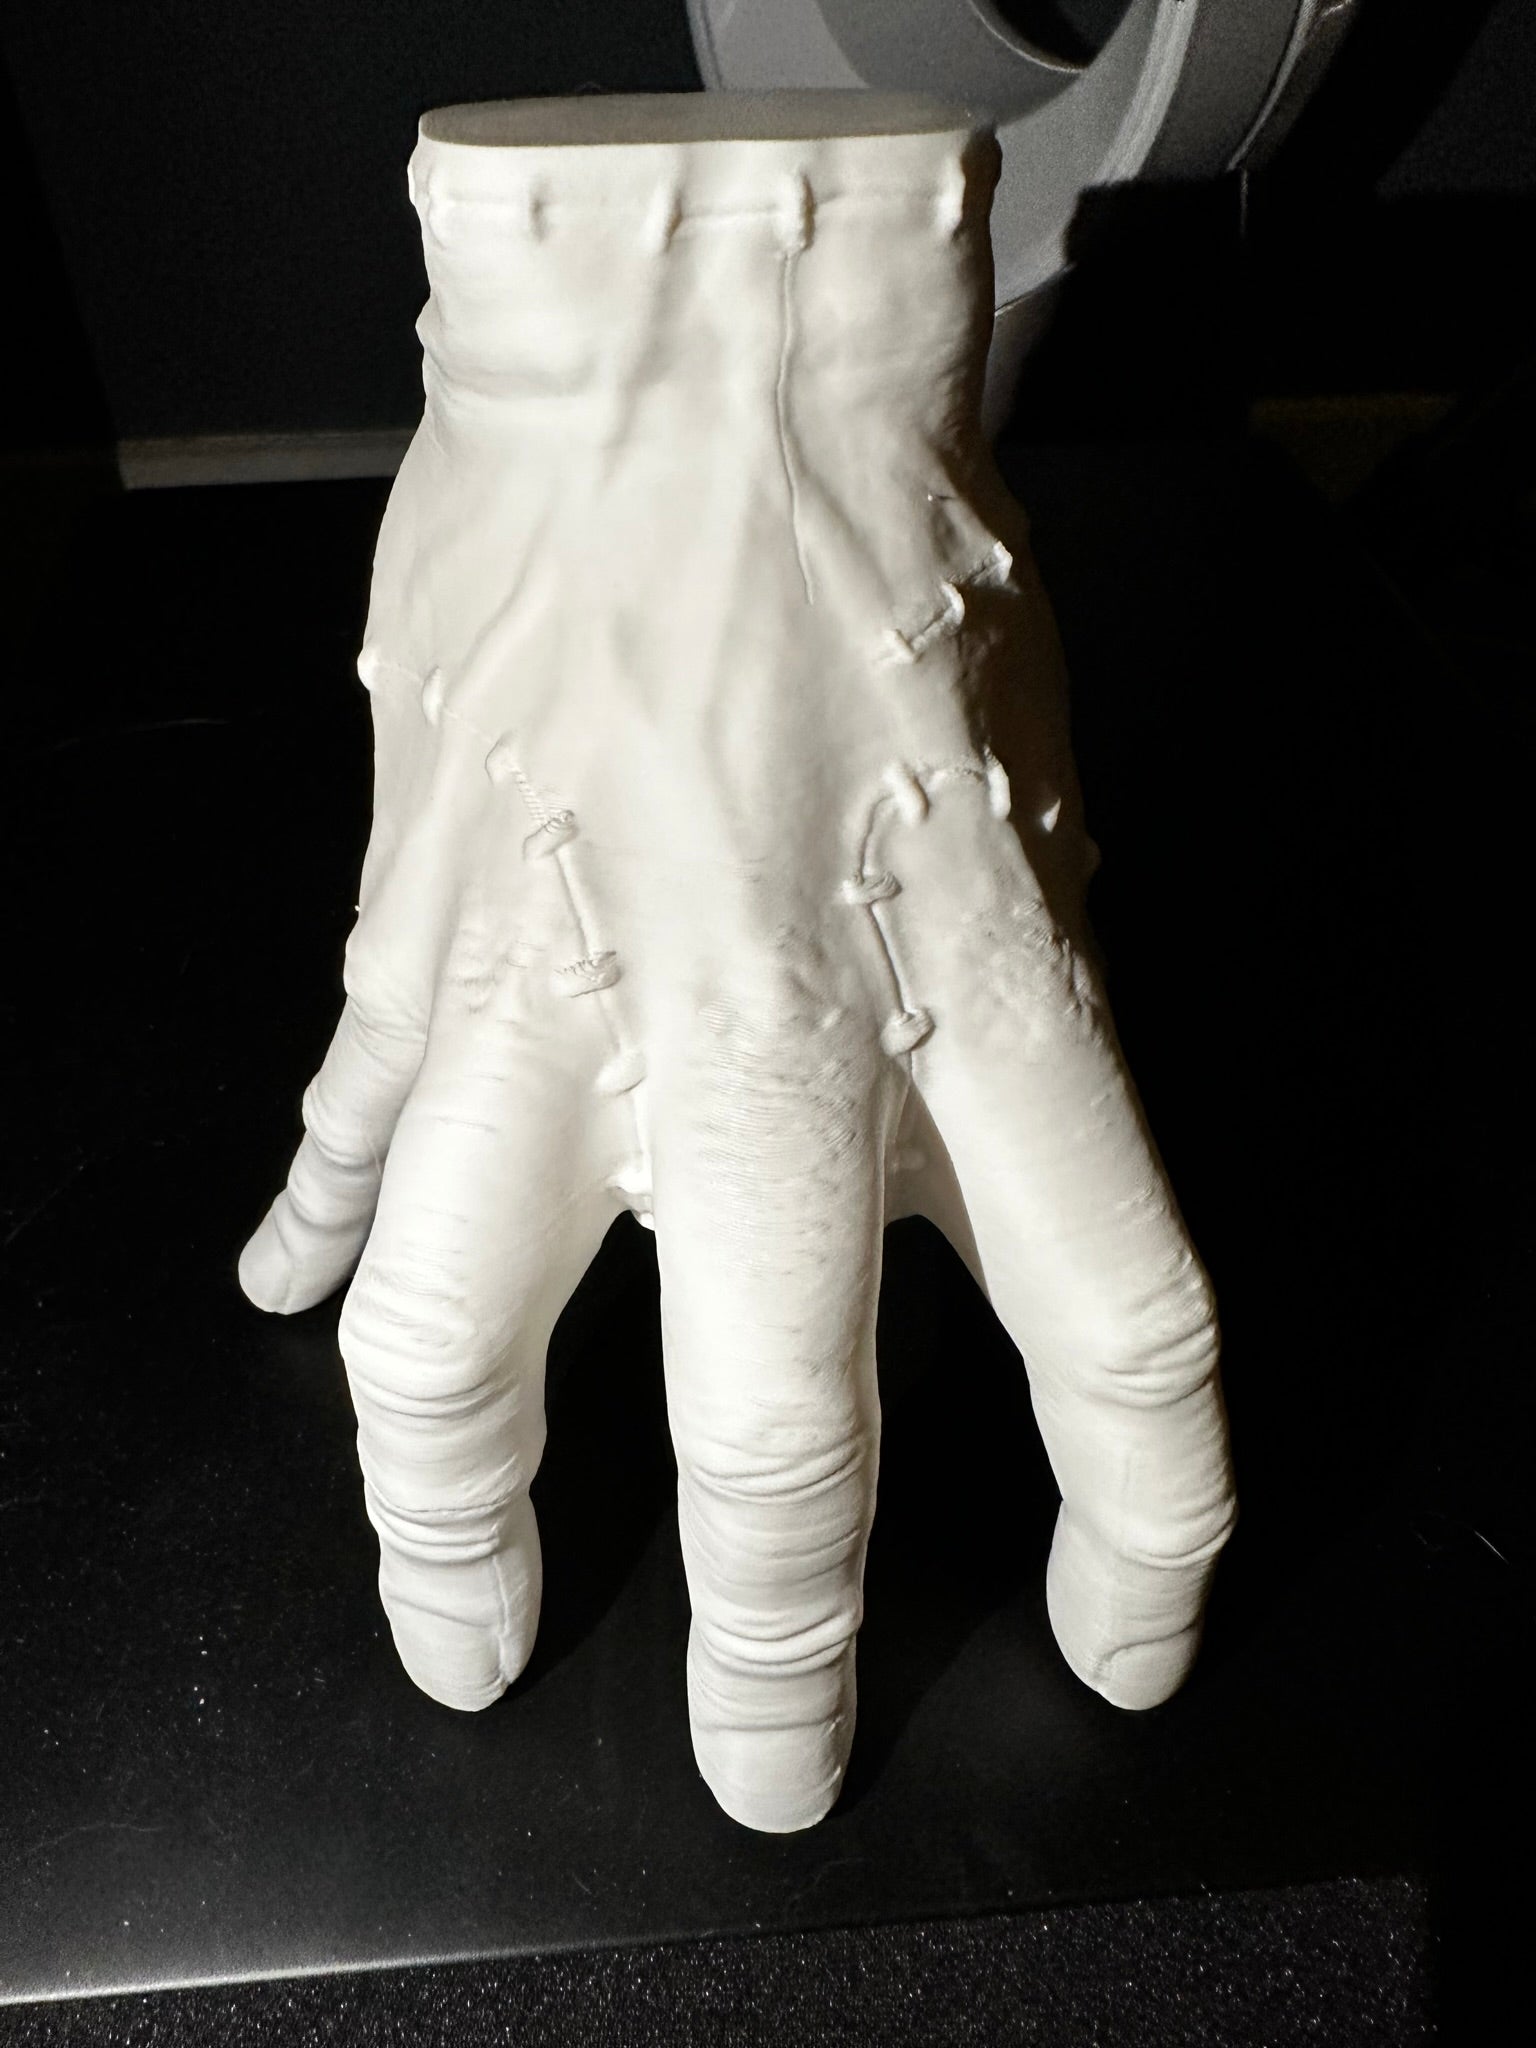 Thing Hand decoration in white on a black surface